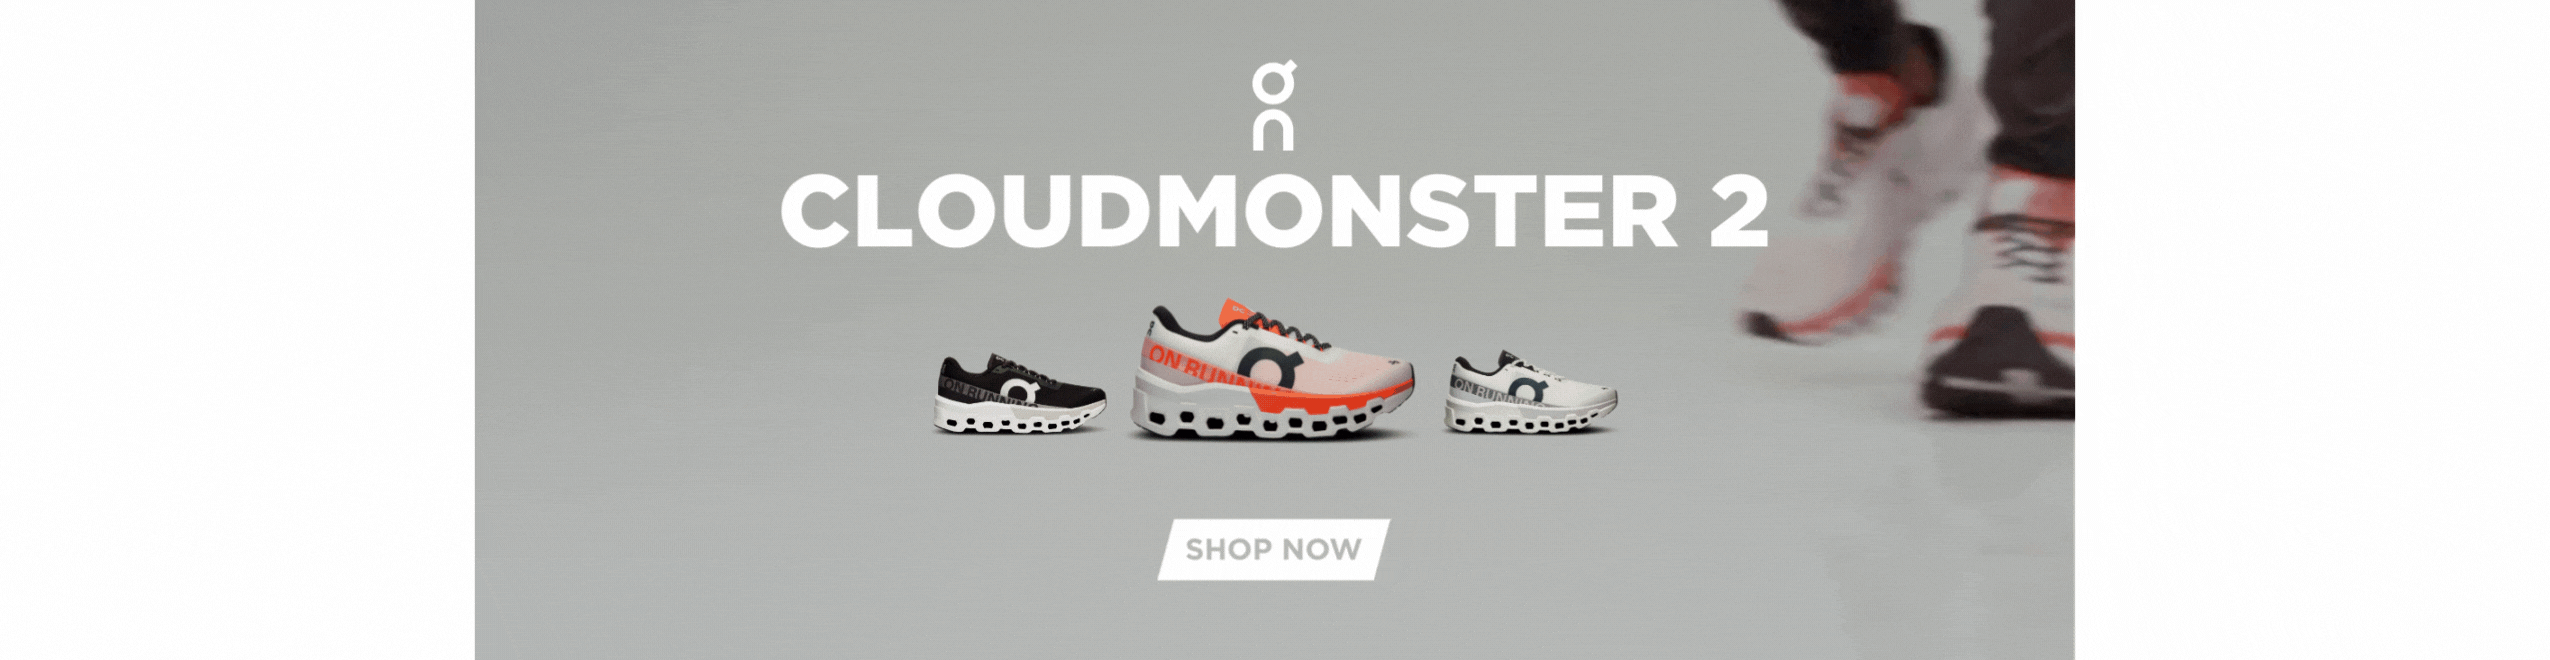 On Cloundmonster 2: Now Launched